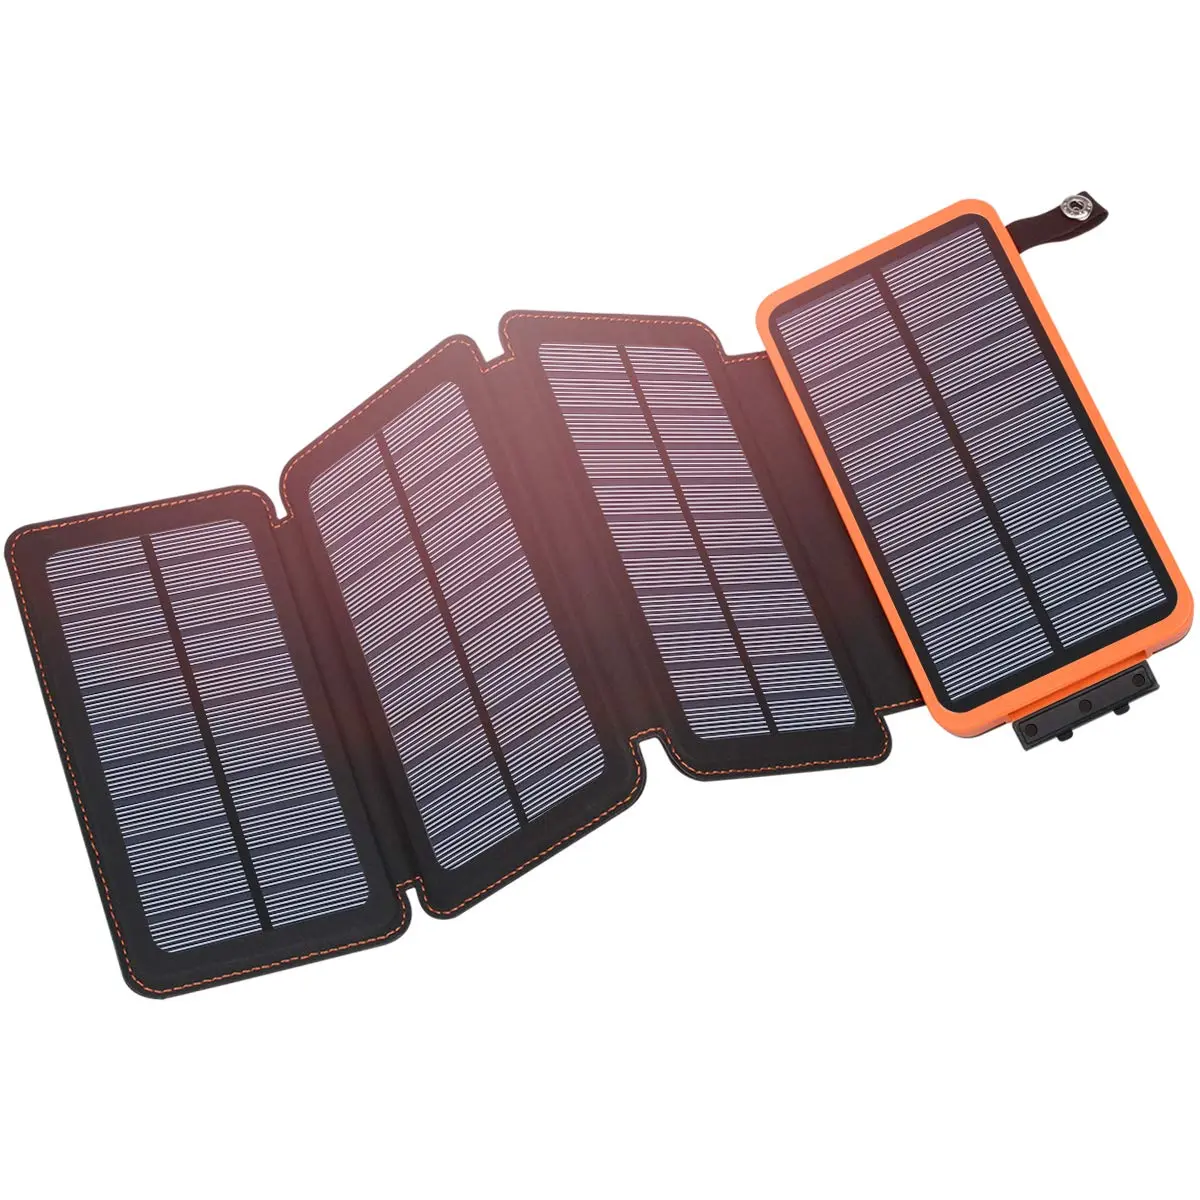 solar panel phone charger - How long does a solar phone charger take to charge